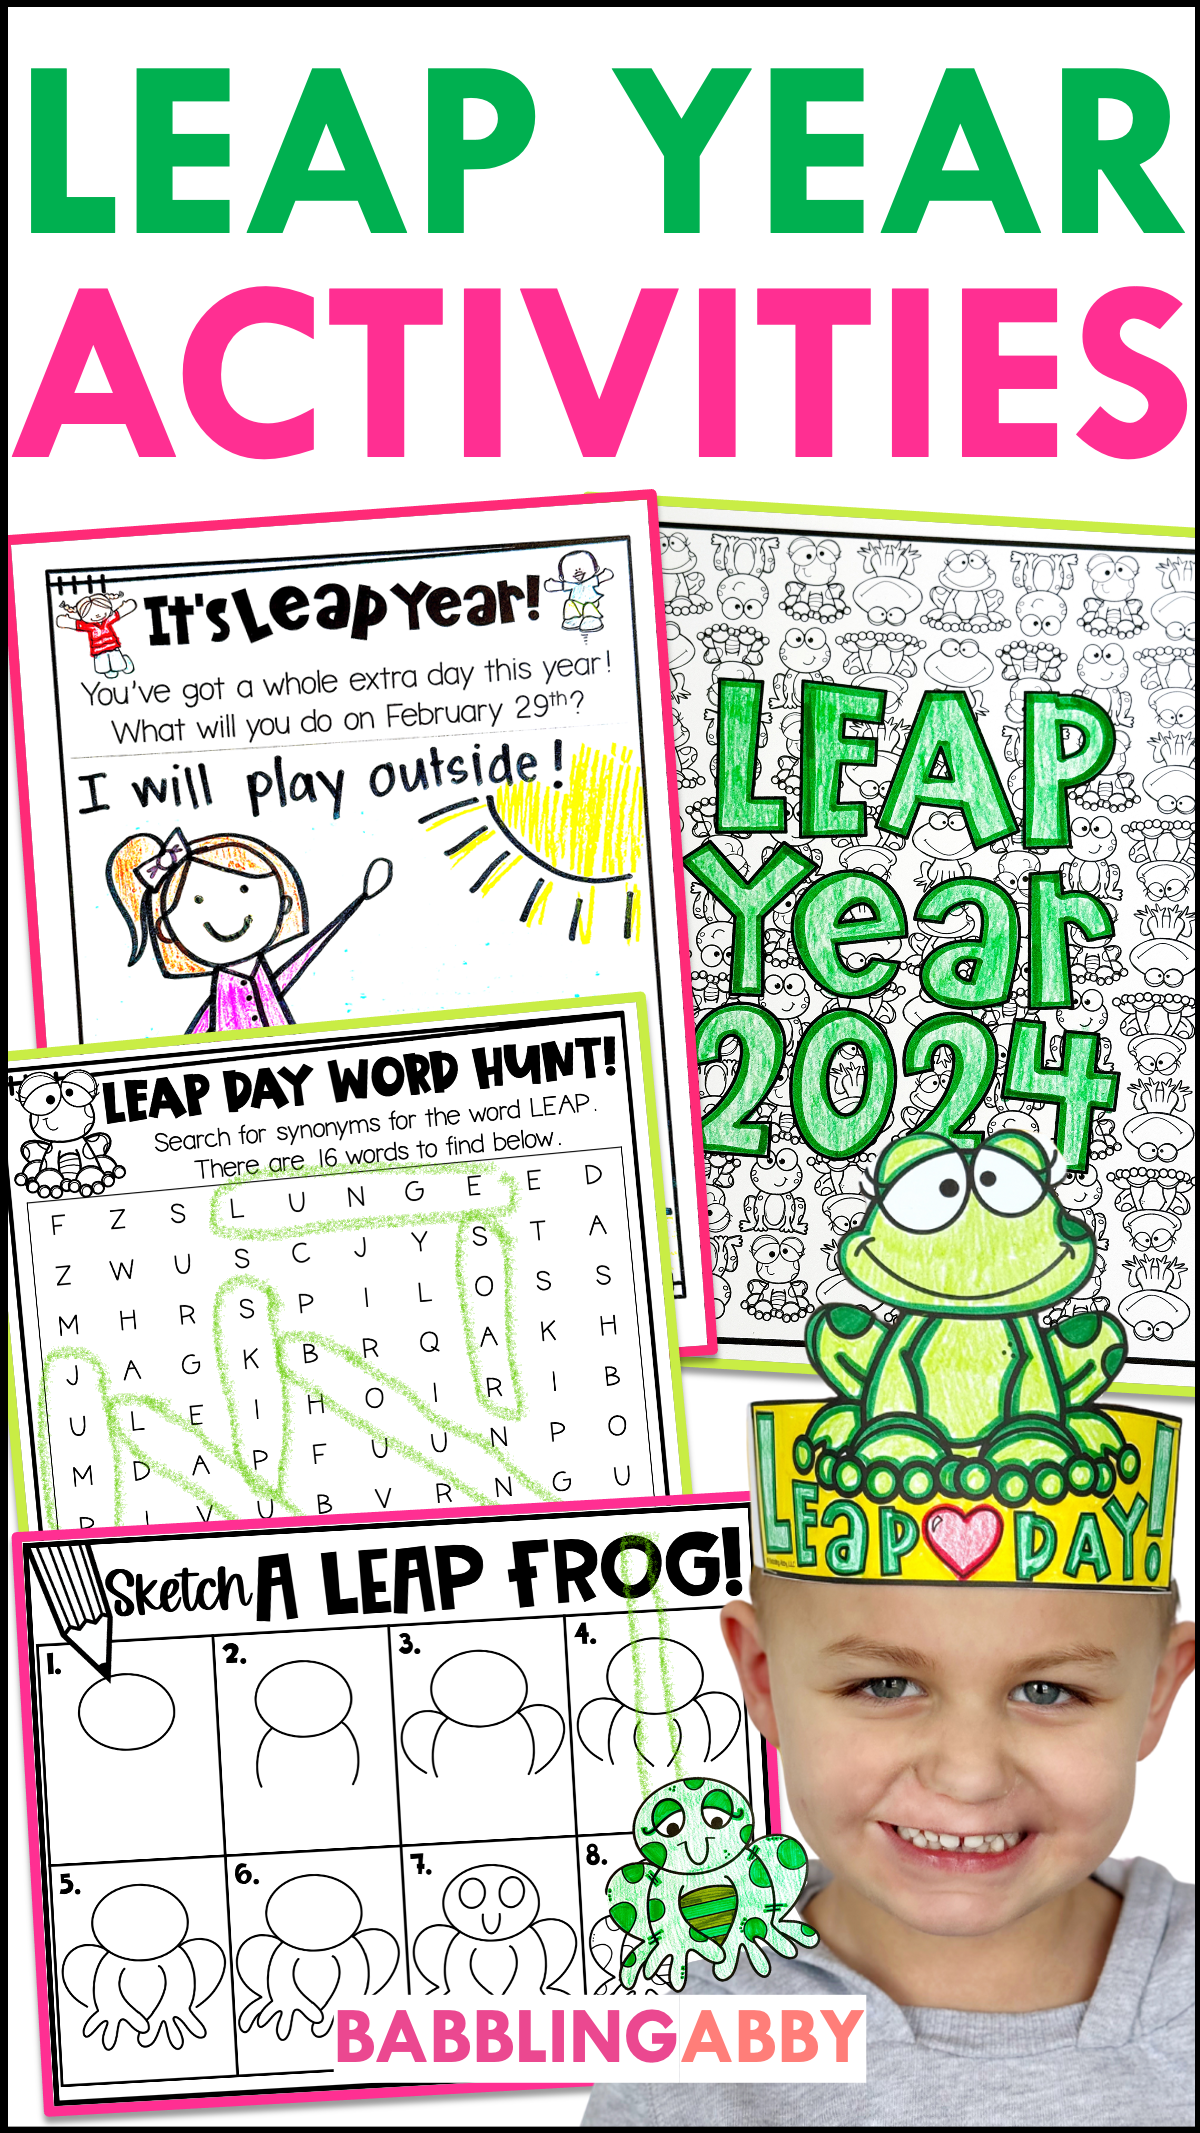 Check out 5 fun activities to celebrate Leap Day in your kindergarten, first grade, or second grade classroom!